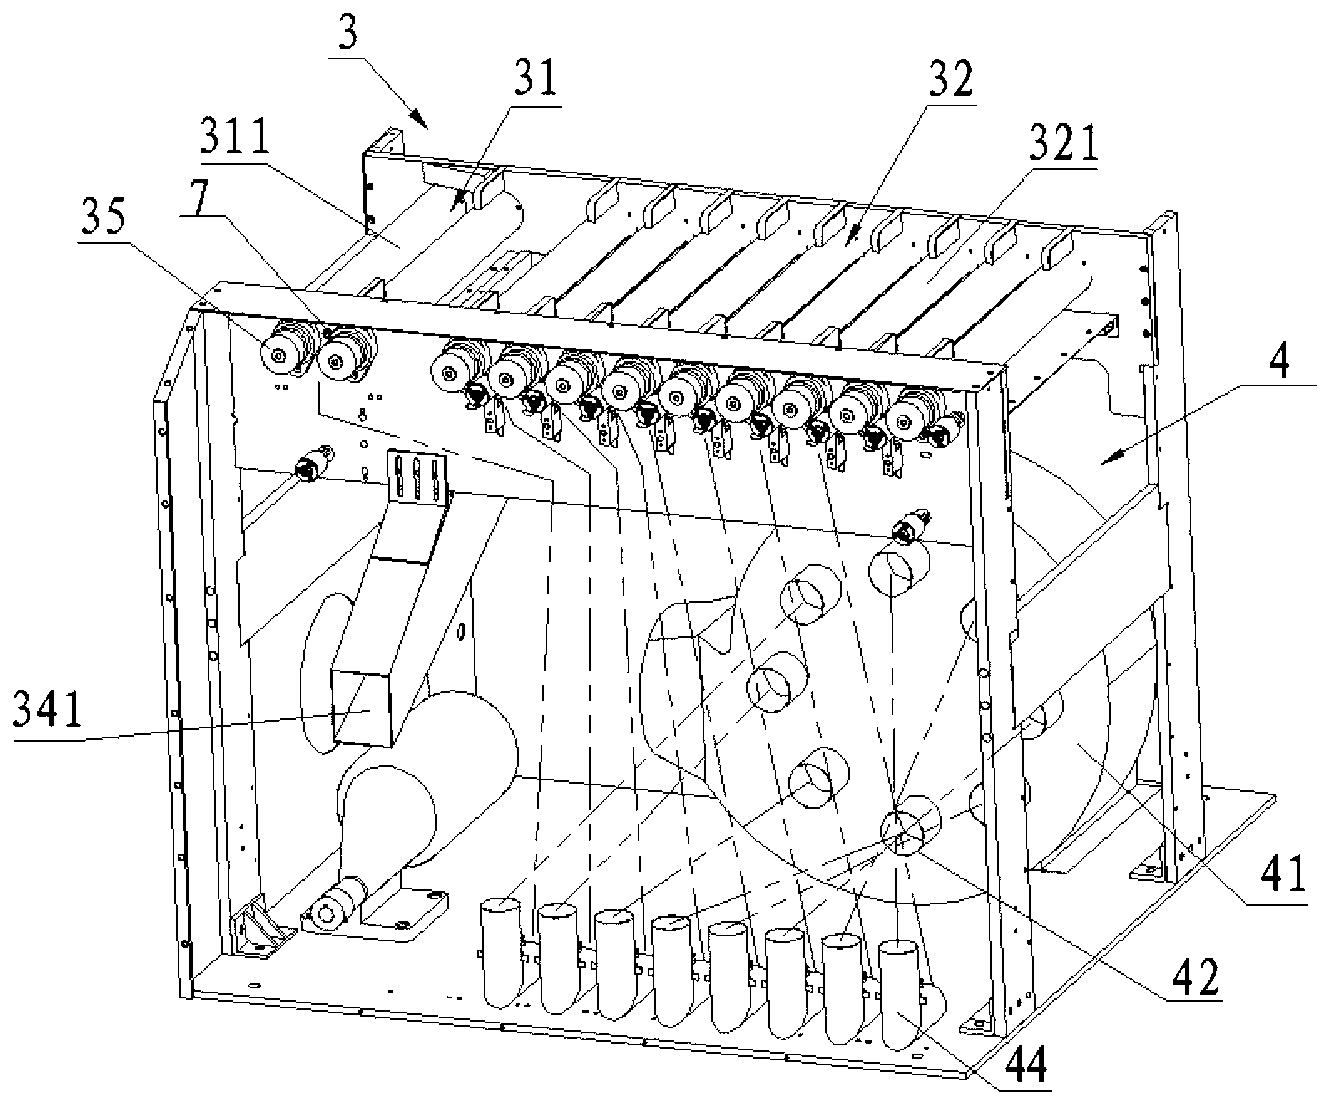 System for automatically cleaning tail yarns of roving bobbins